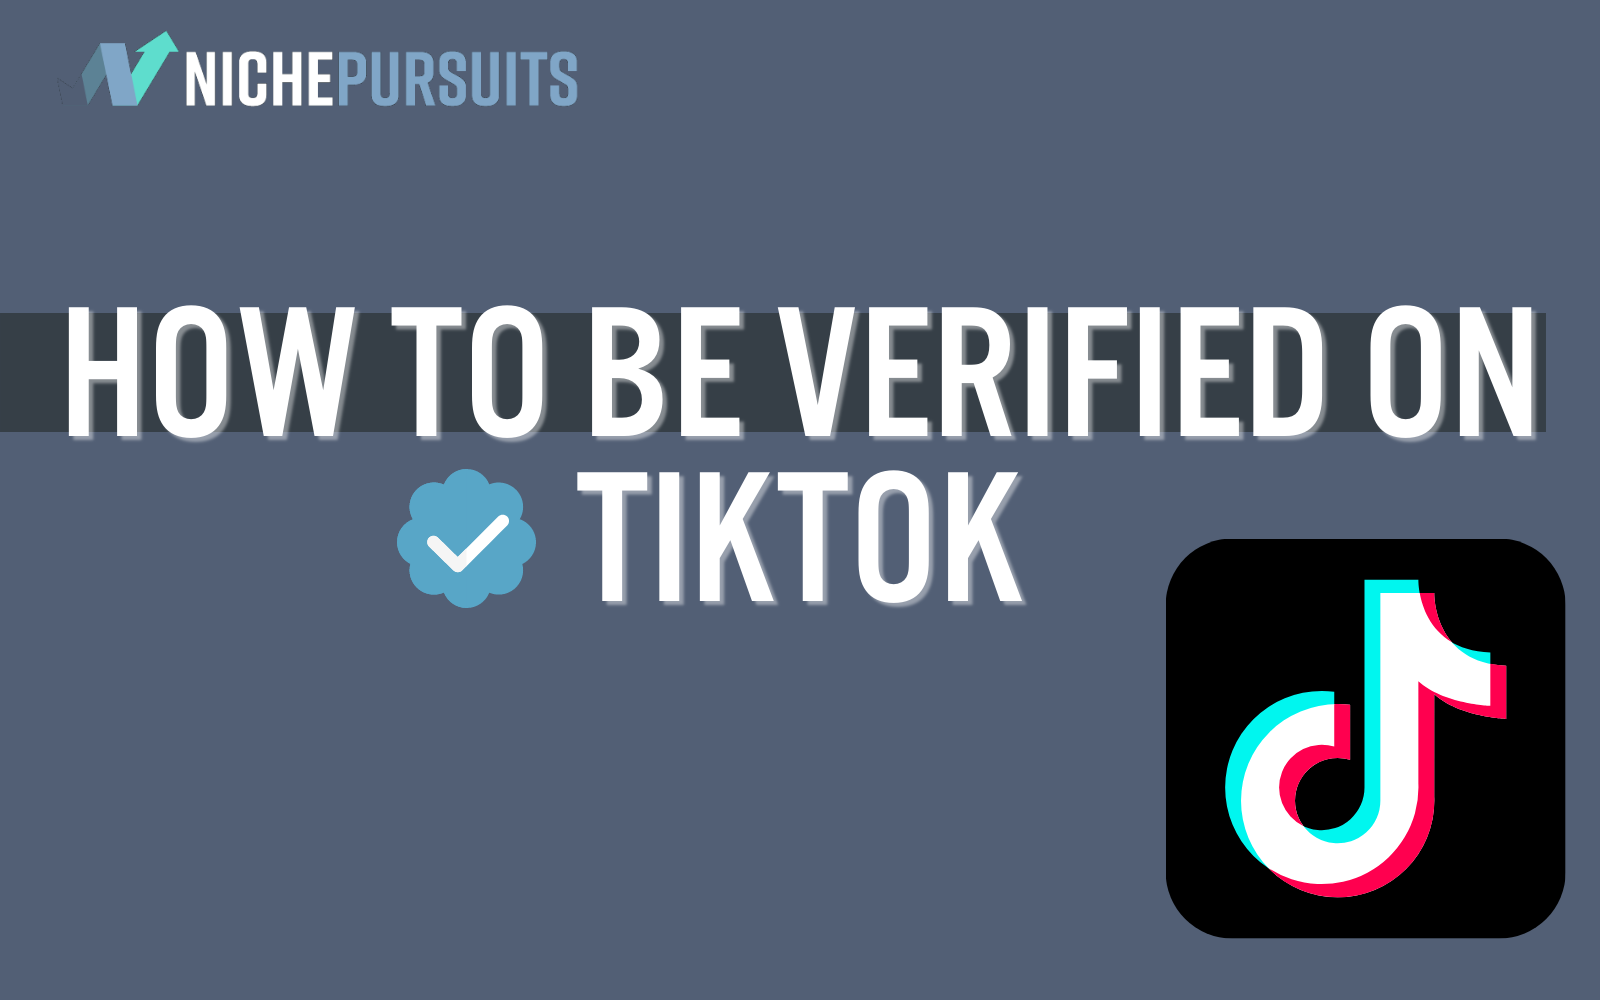 can you buy verified badge on ig｜TikTok Search